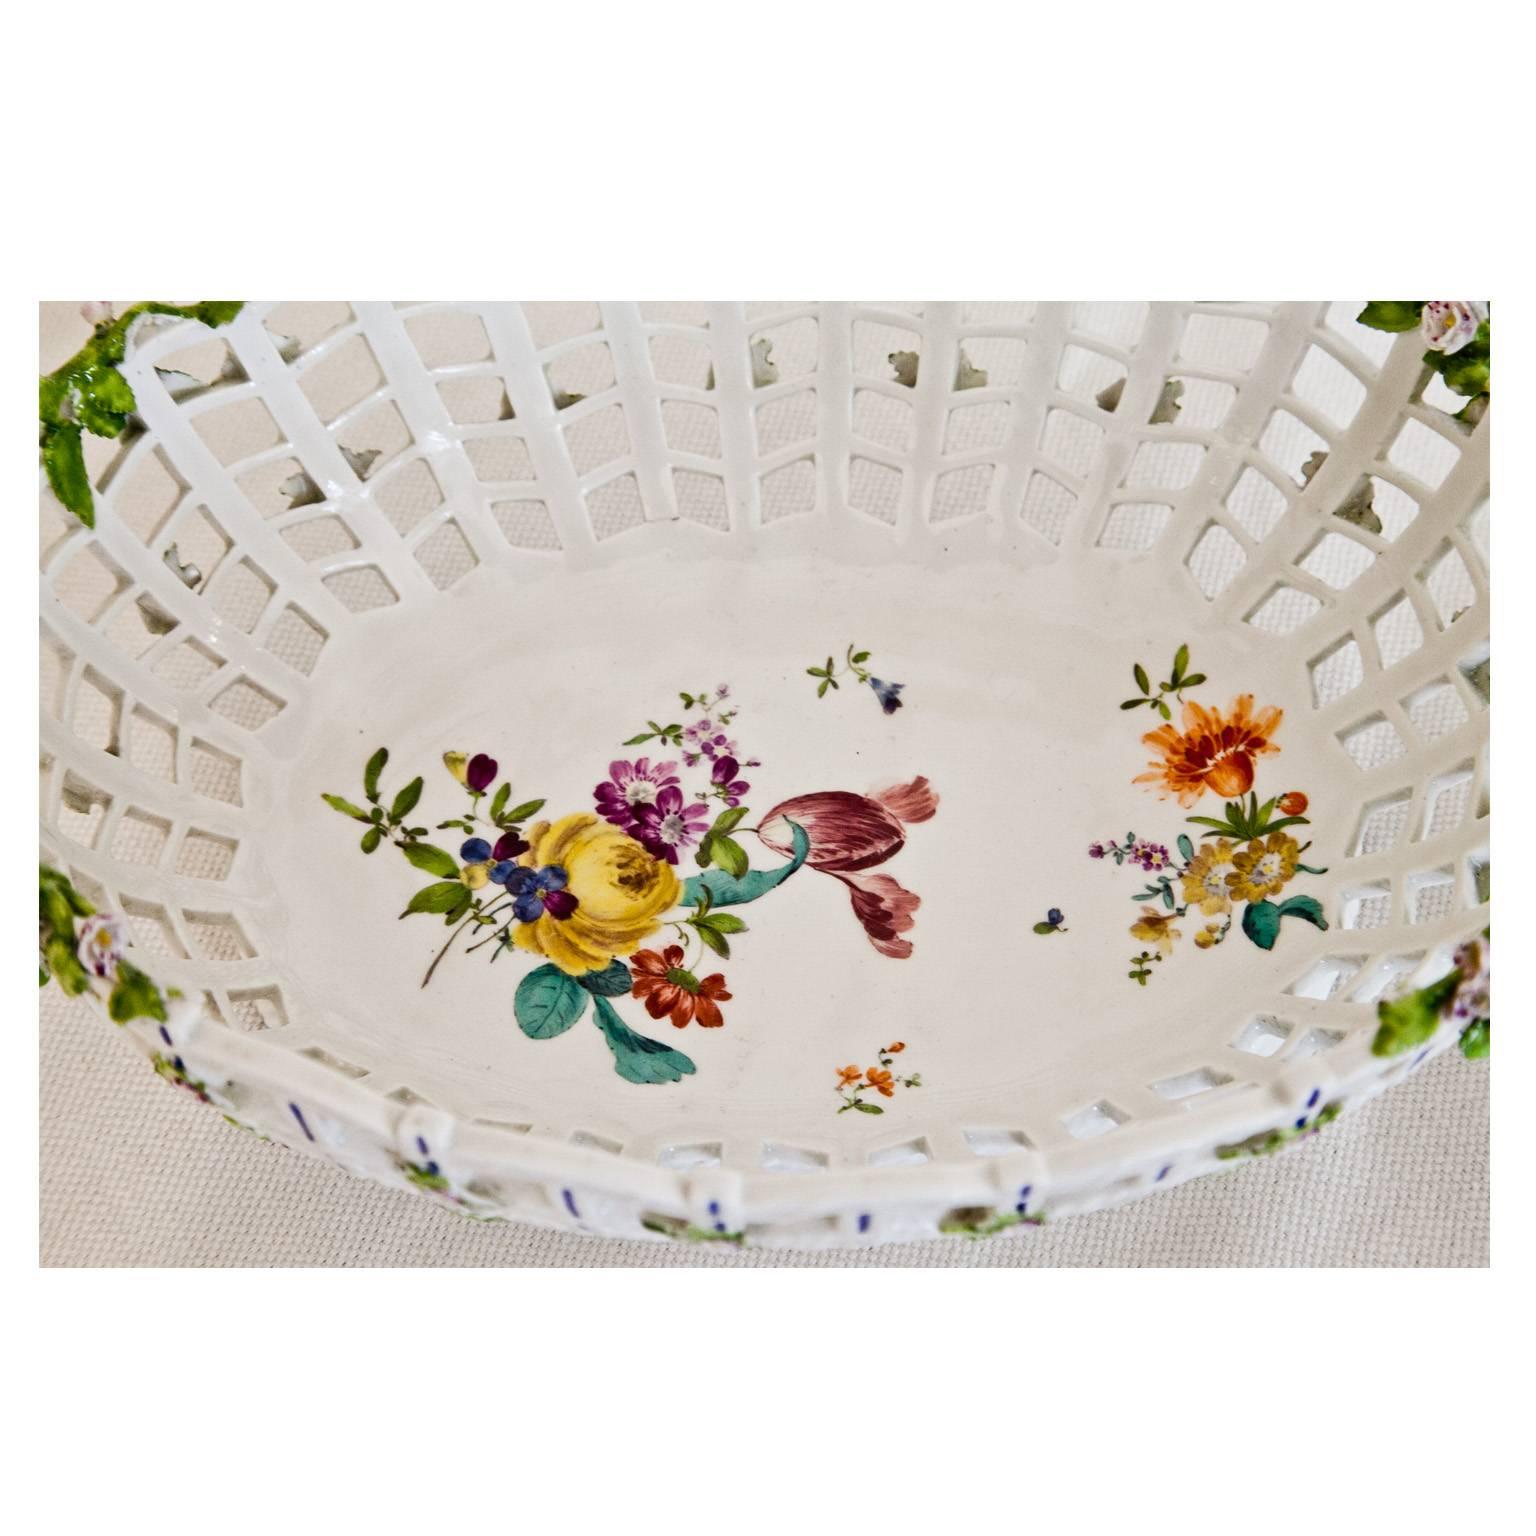 Oval porcelain basket with handles by KPM Berlin with plastic flower décor on the pierced rim and a polychrome flower bouquet on the well.